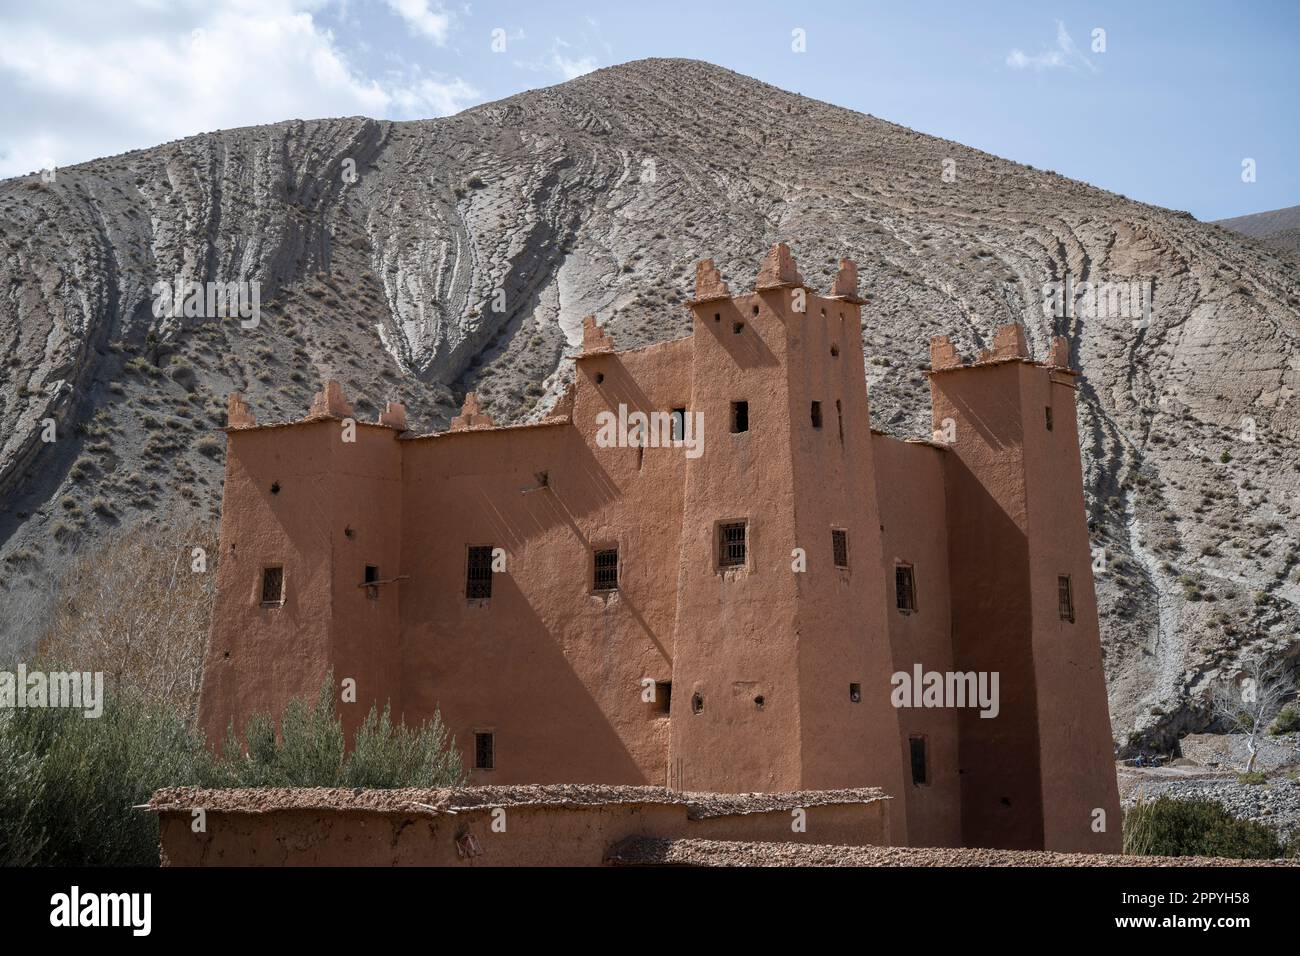 Ruins of an adobe kasbah in a village near the Dades Gorge. Stock Photo